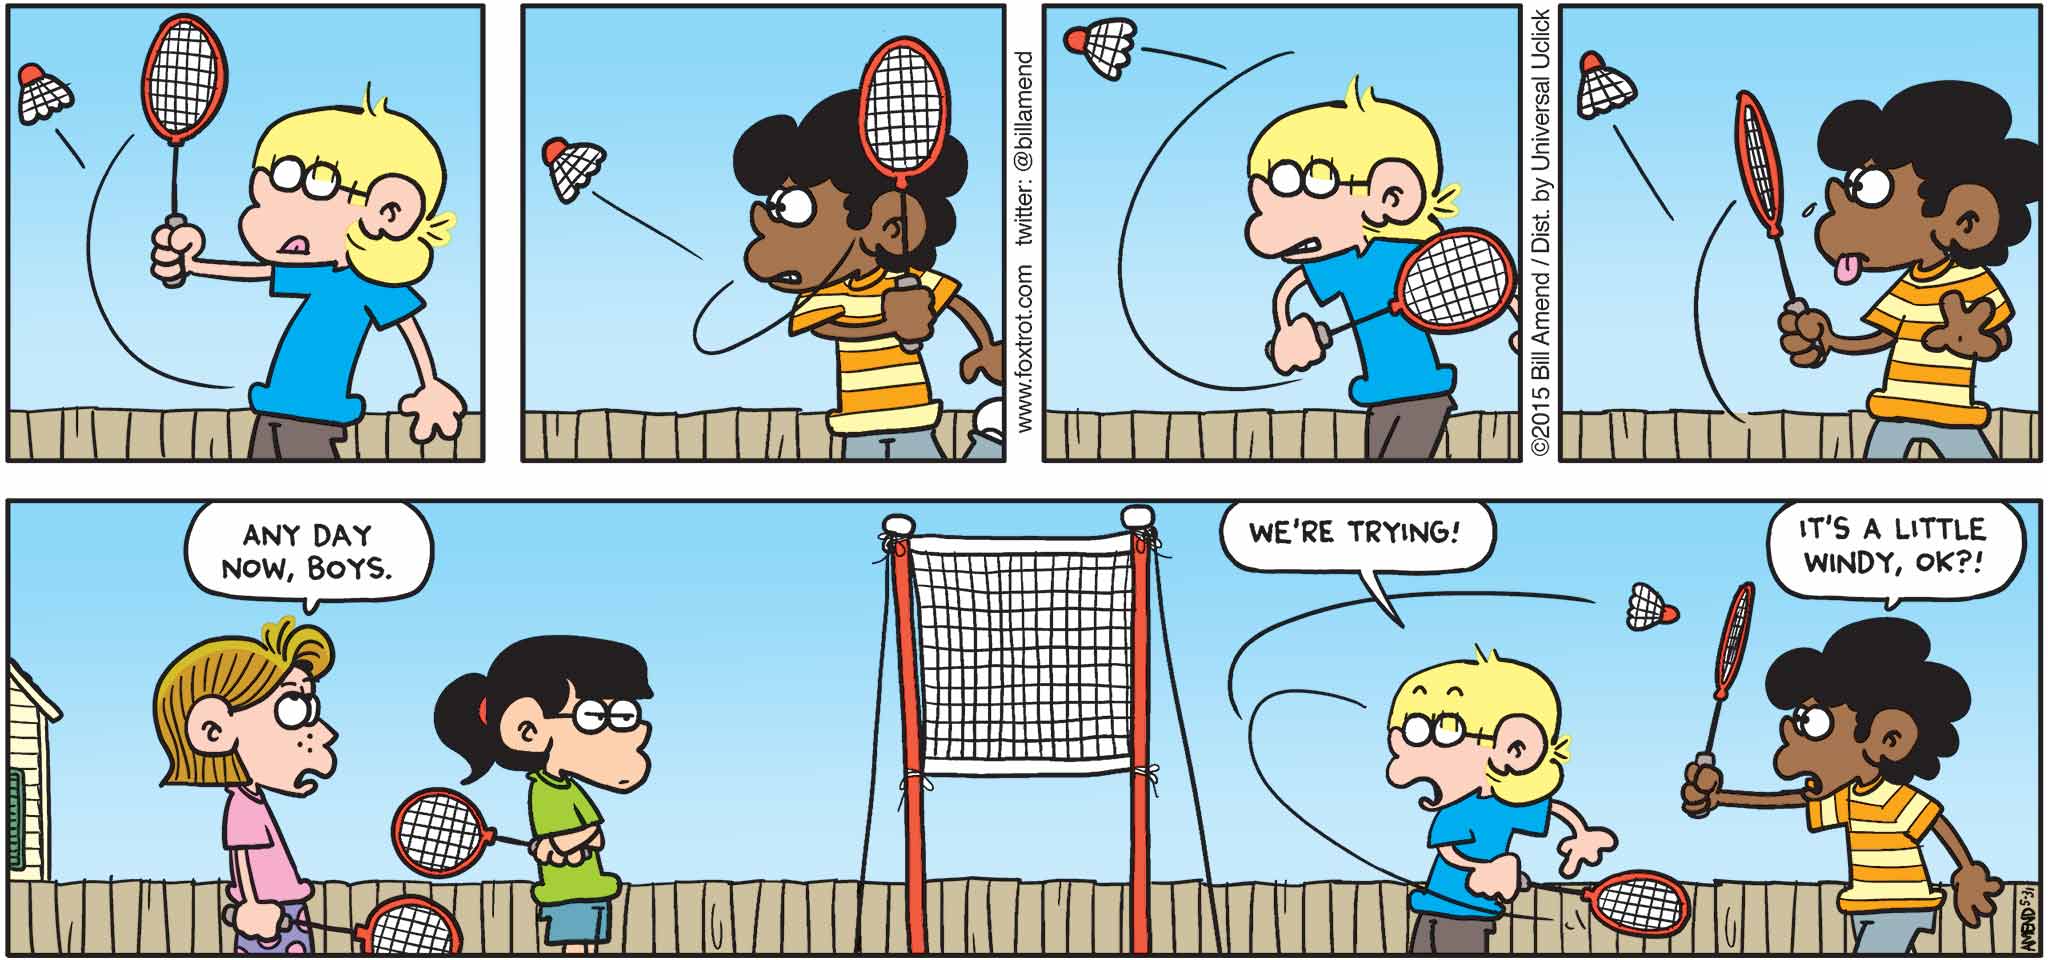 FoxTrot by Bill Amend - "Bad Minton" published May 31, 2015 - Eileen: Any day now, boys. Jason: We're trying! Marcus: It's a little windy, ok?!